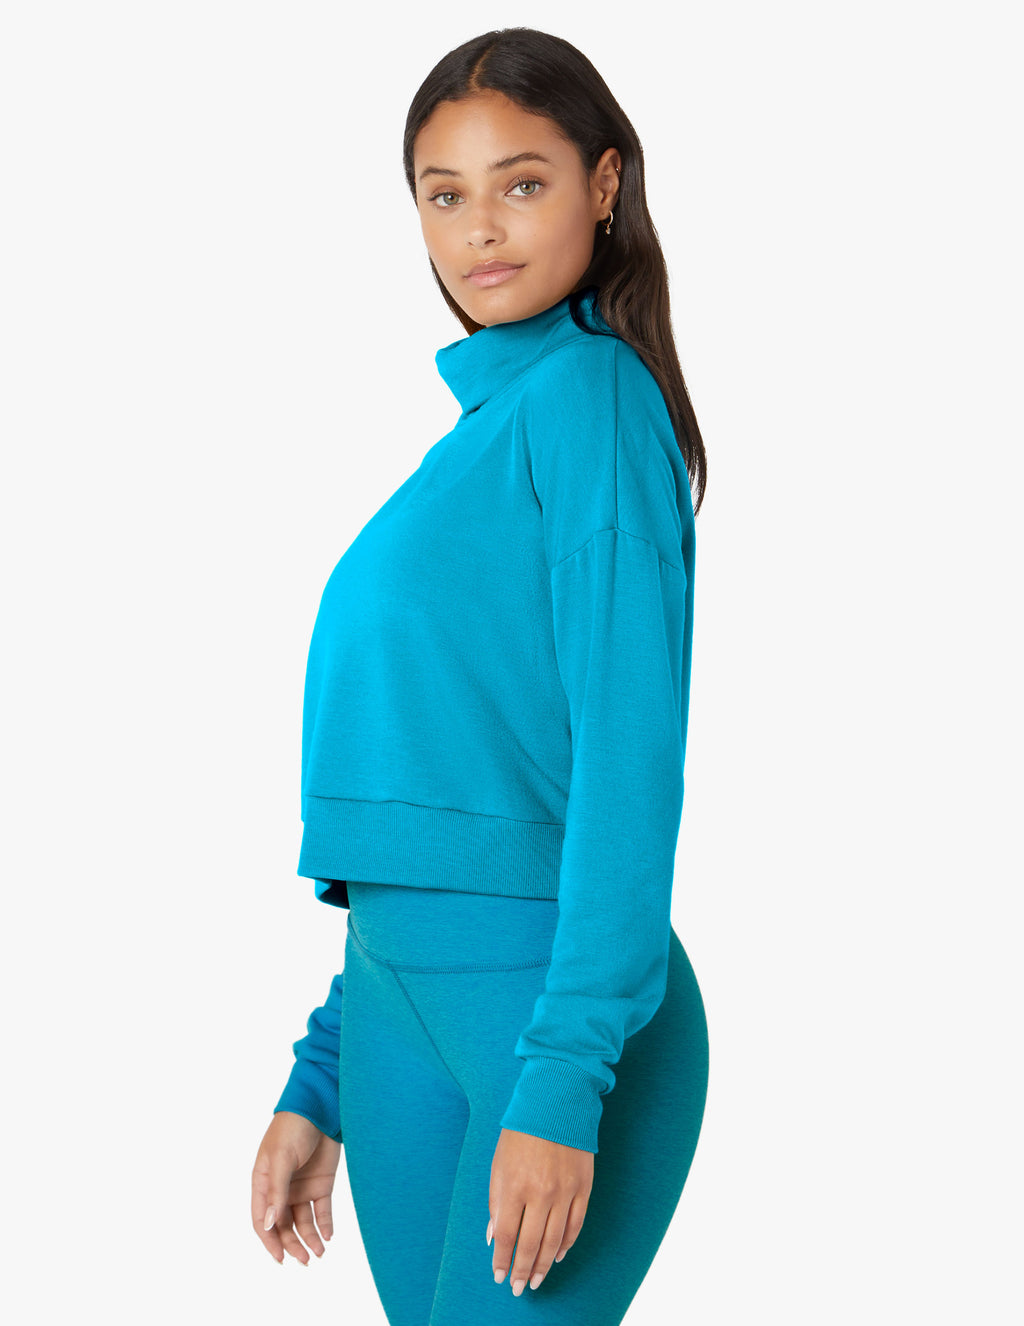 Women's Yoga Clothing - All Sale & Clearance Items  Beyond Yoga –  Translation missing: en.general.meta.page